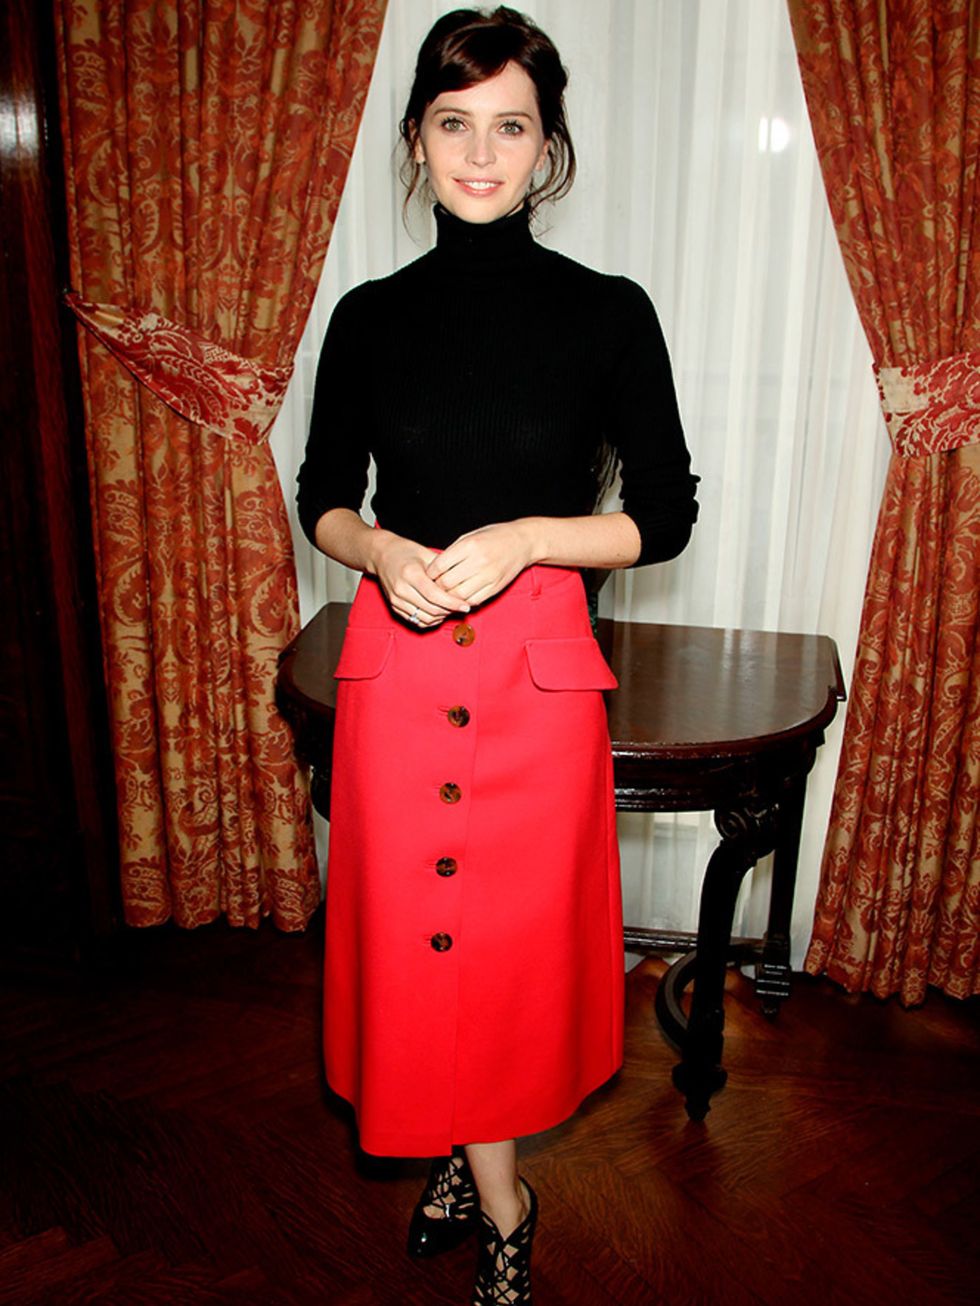 Felicity Jones at The Theory of Everything film luncheon in New York, October 2014.